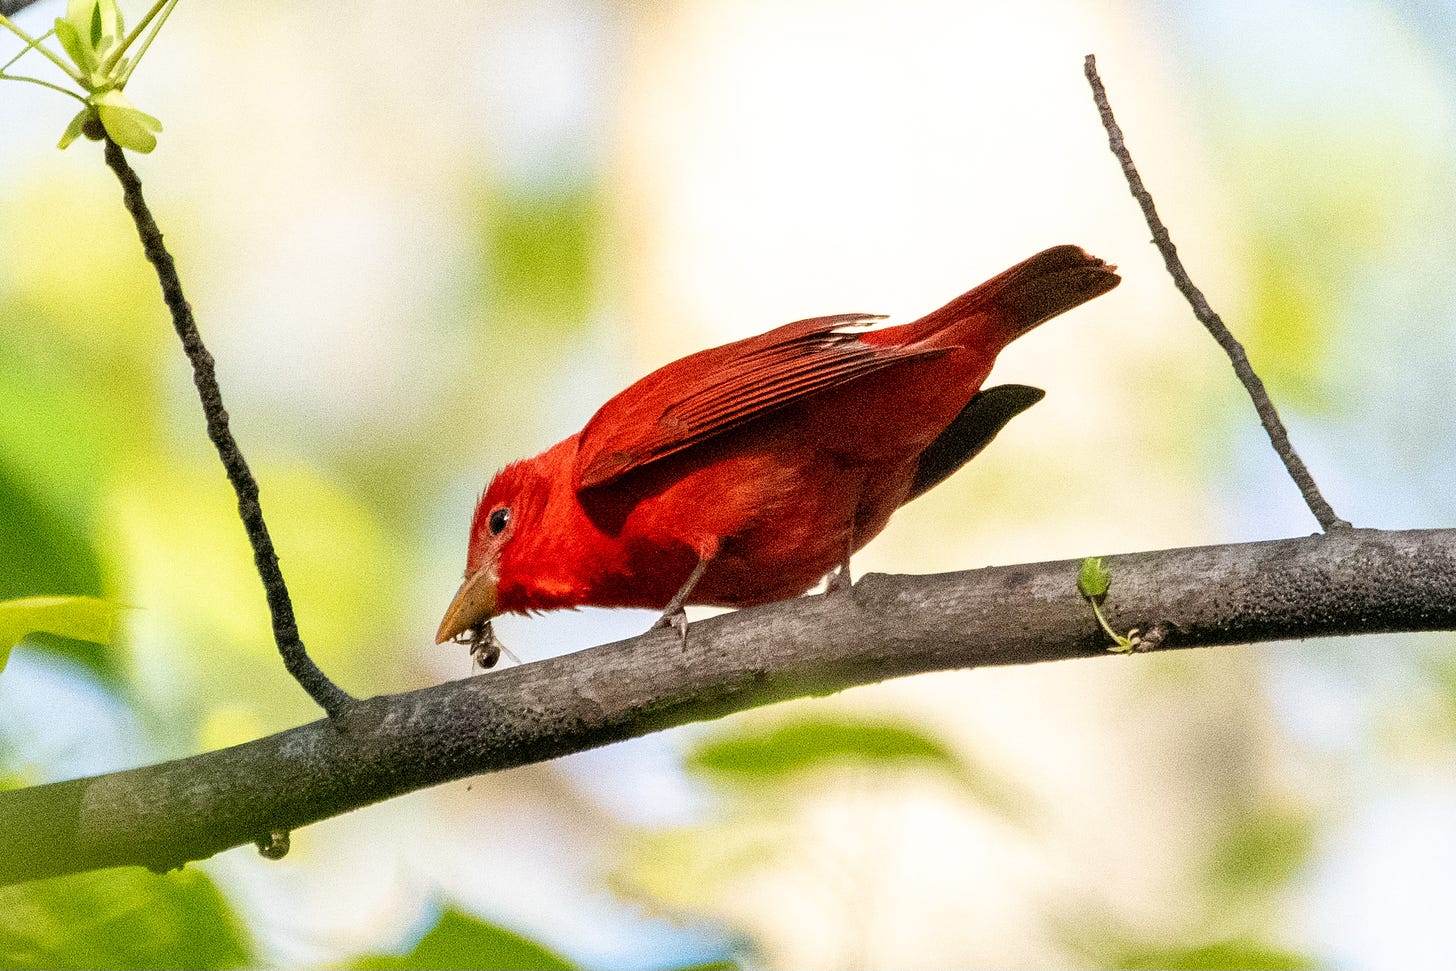 A fire-red bird with a thick orange bill is munching on a wasp